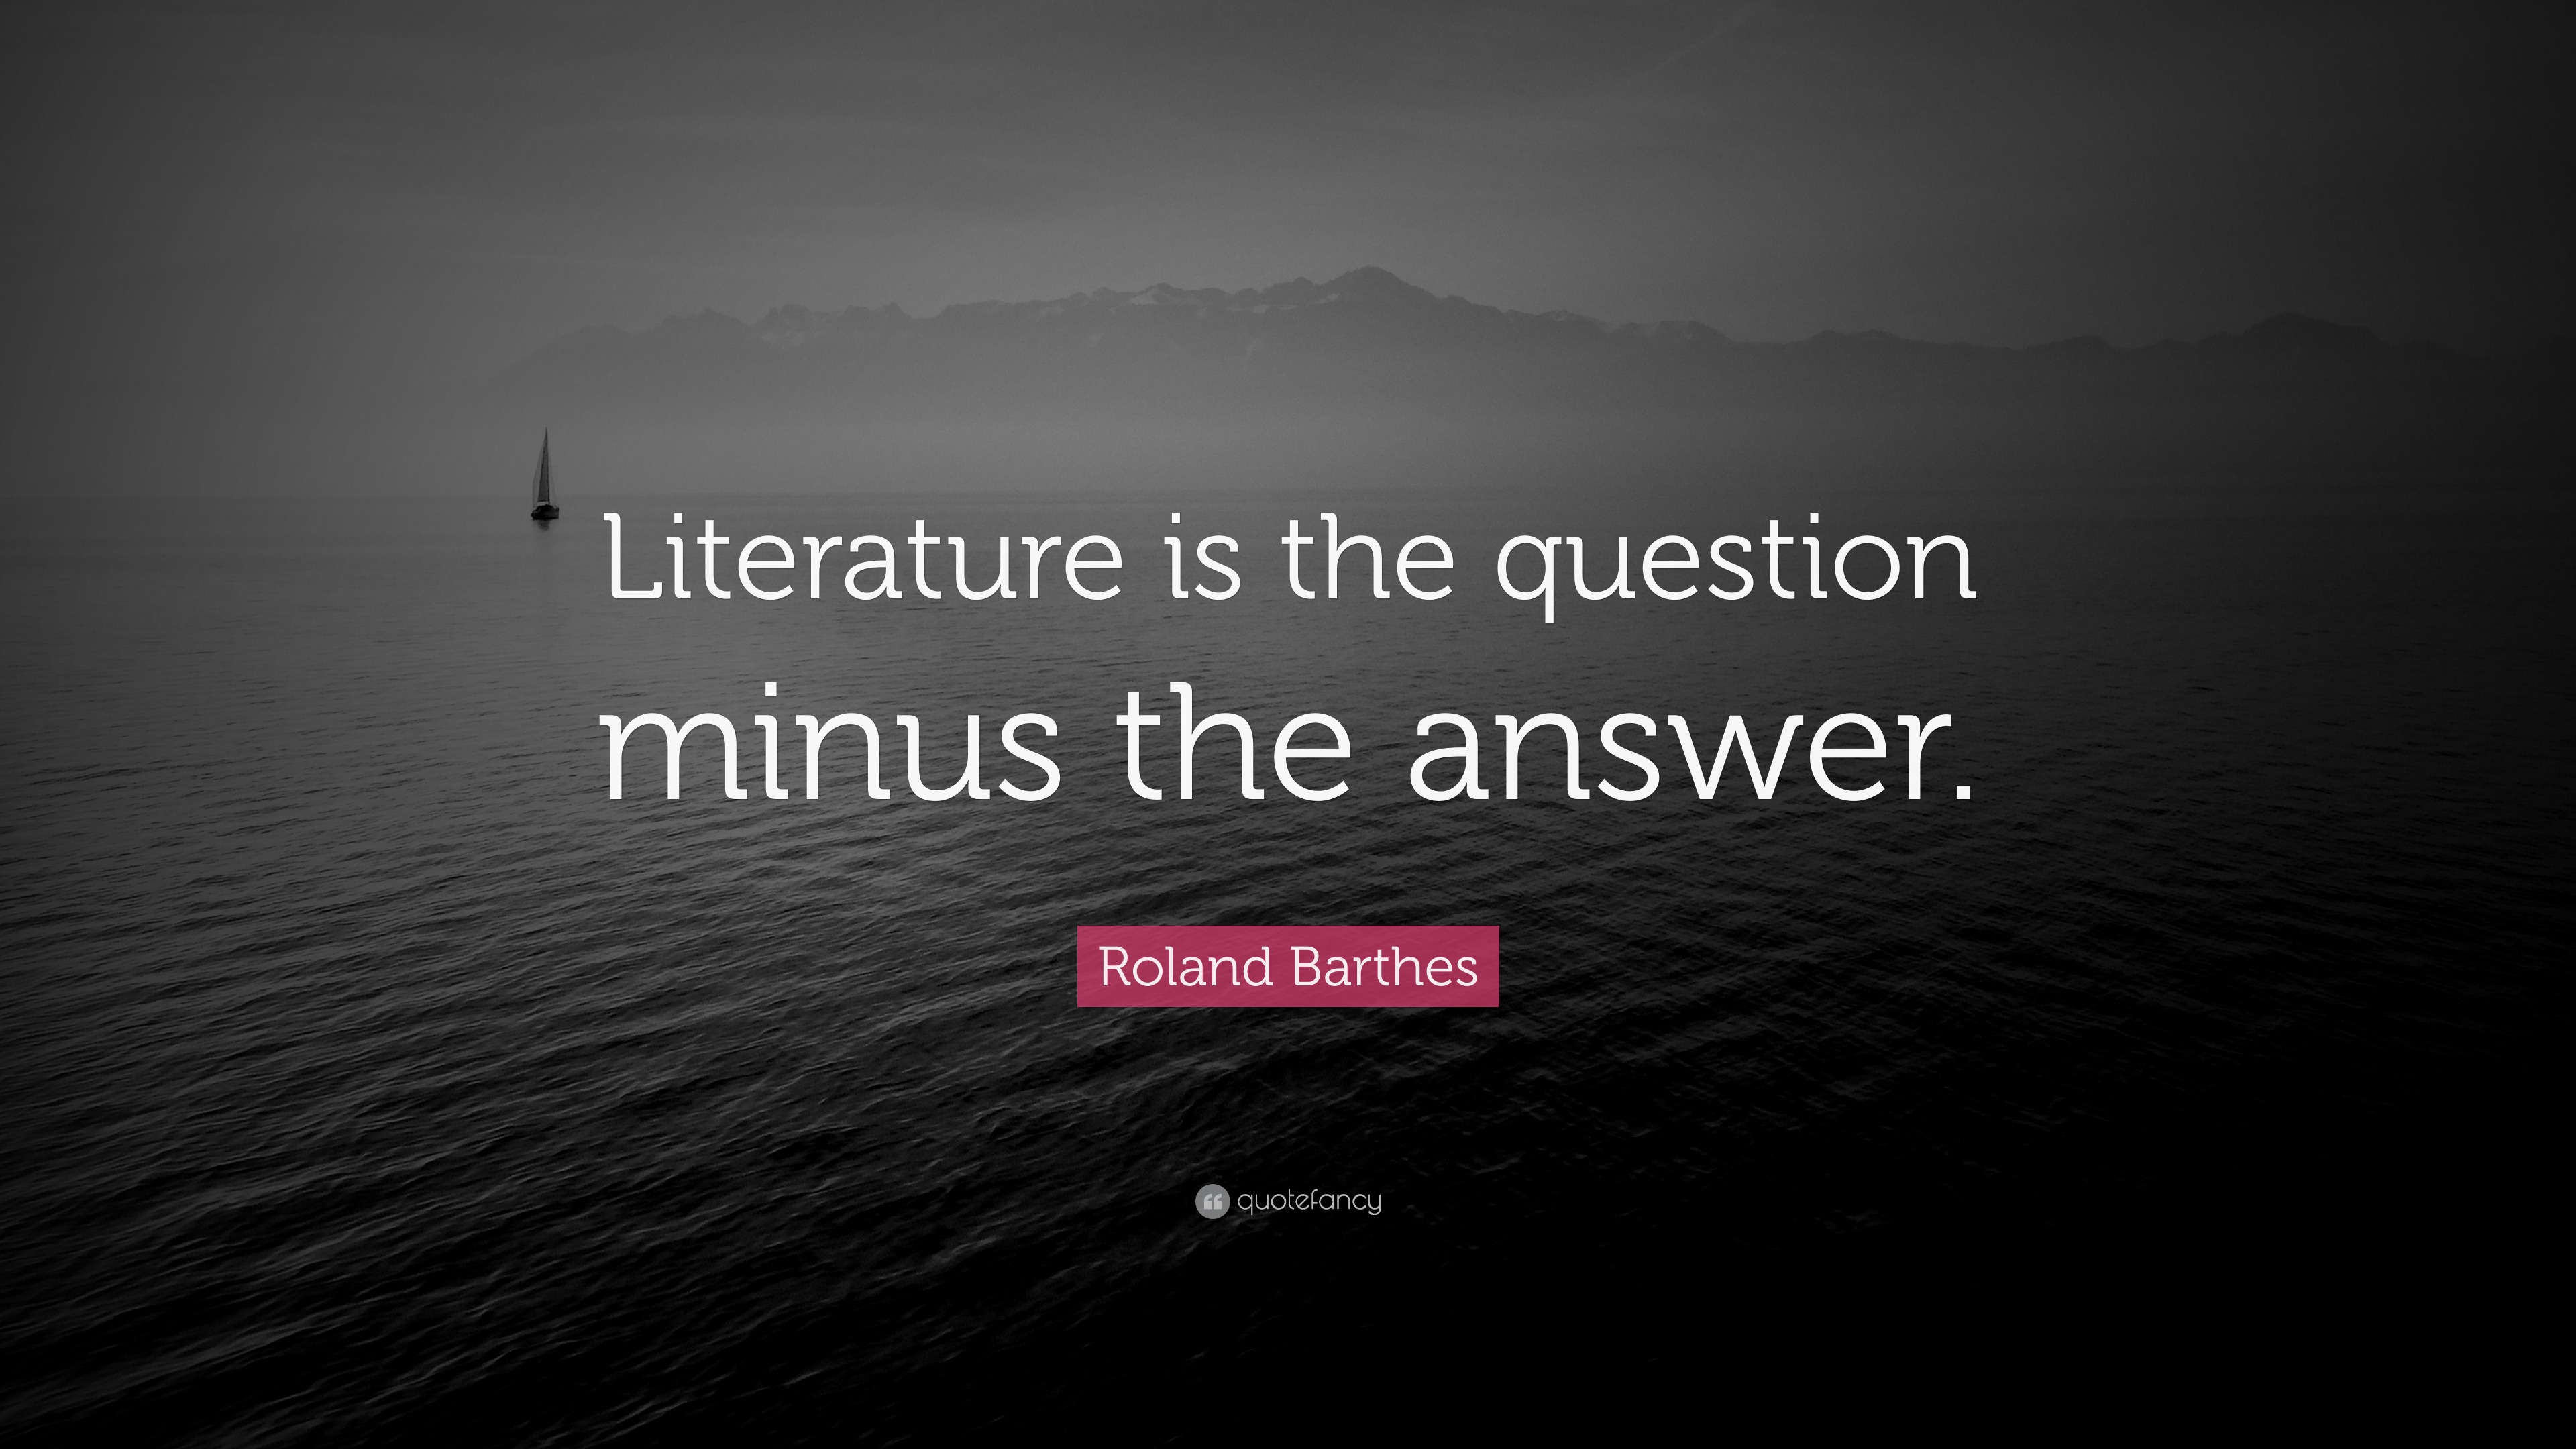 literature is the question minus the answer